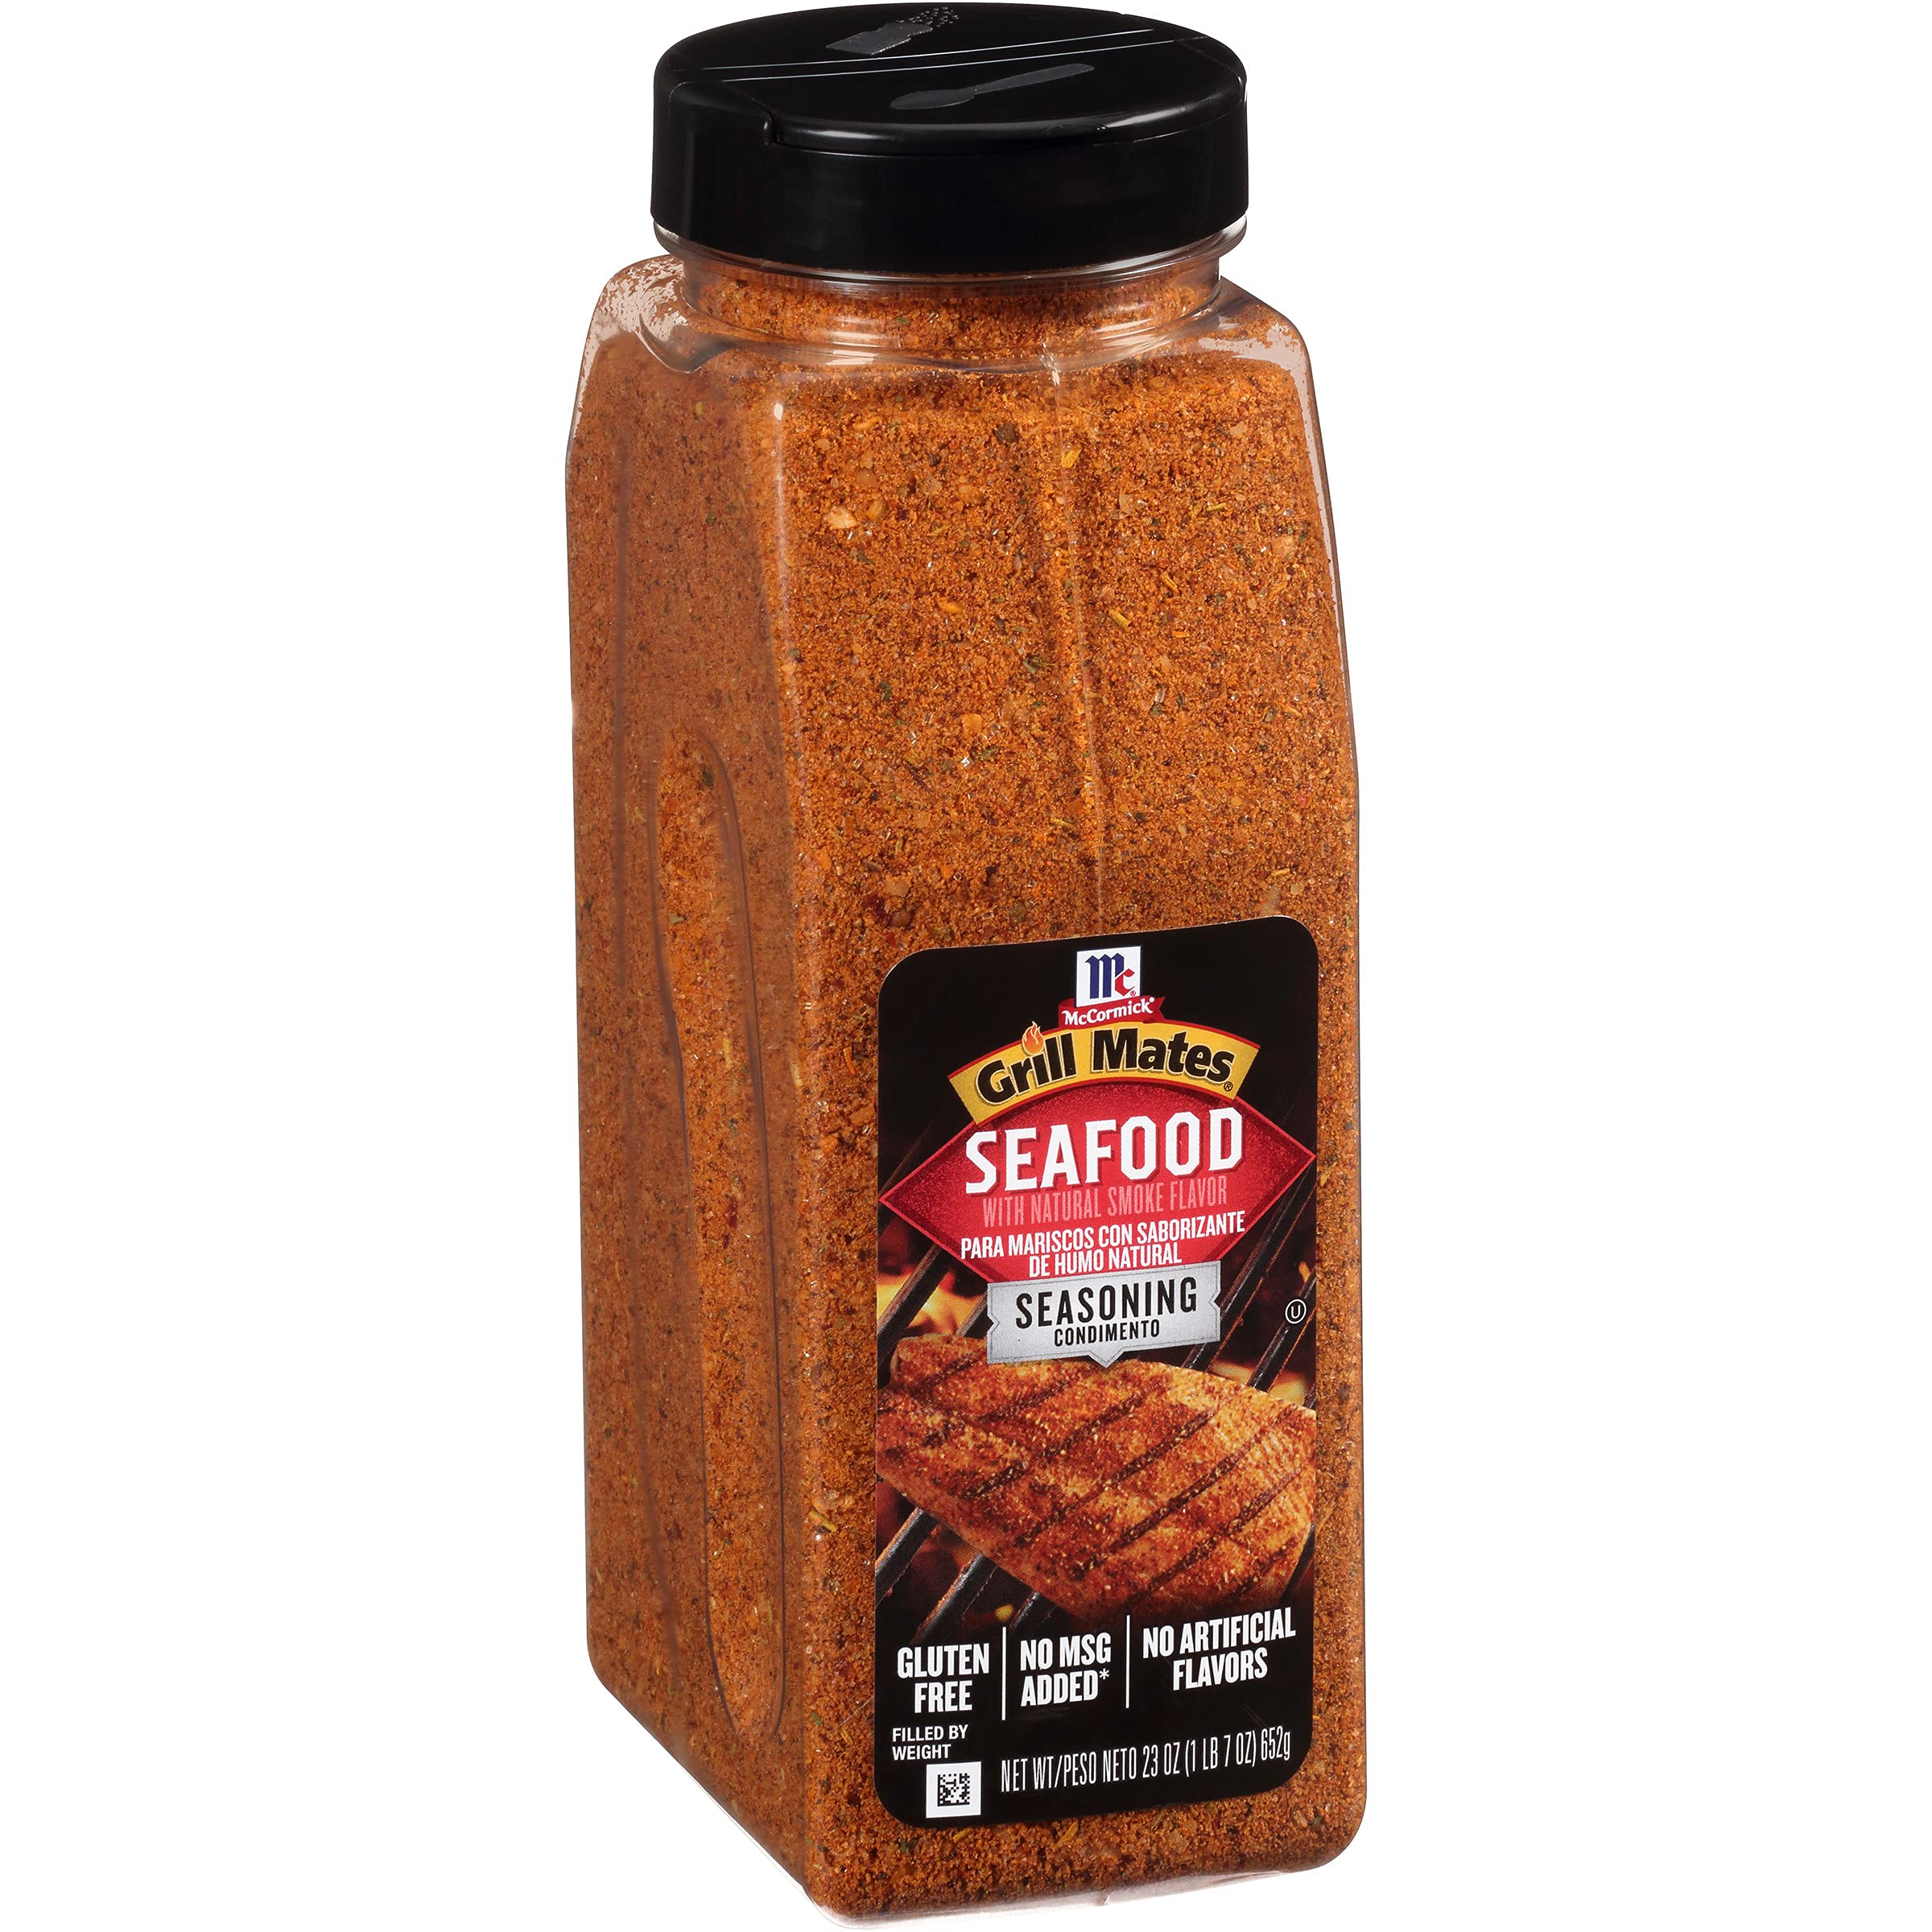 McCormick Grill Mates Seafood Seasoning, 23 oz - One 23 Ounce Container of Fish  Seasoning, Enhancing Flavor of Seafood, Beef, Poultry, Vegetable Dishes and  More